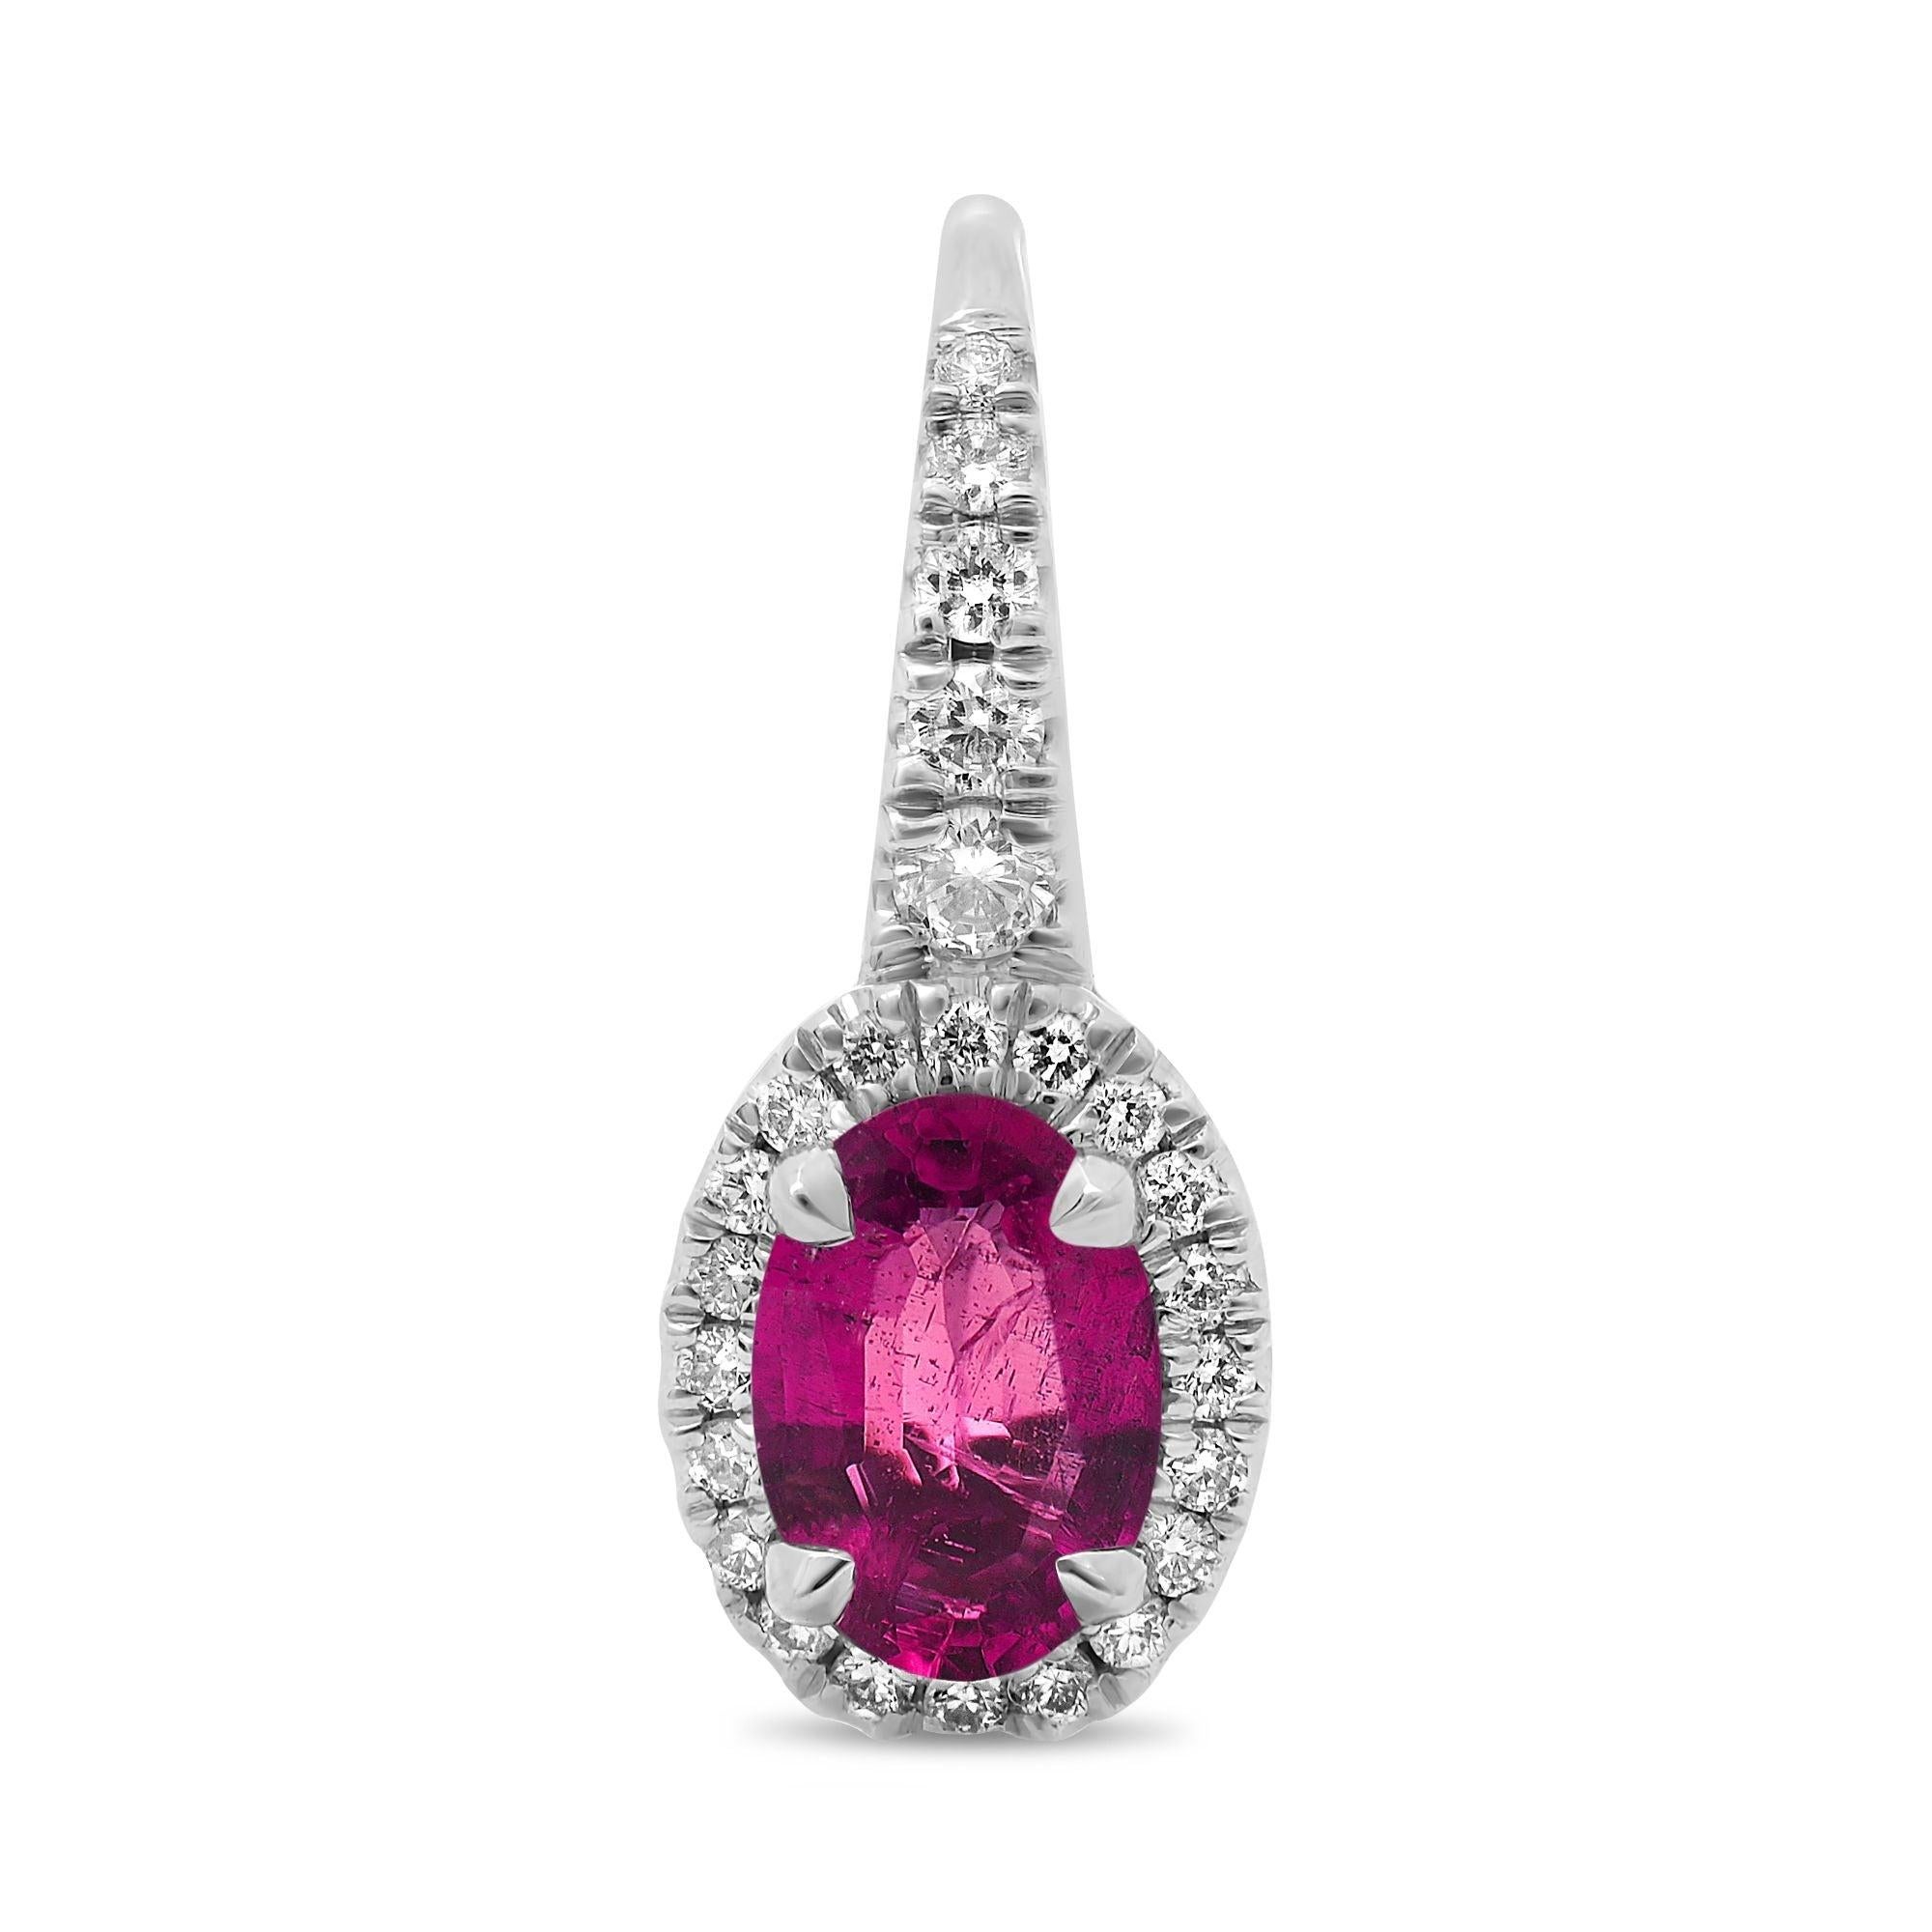 These 18 karat white gold lever back earrings feature two enchanting oval-cut pink sapphires totaling to 1.36 carats as the focal points with 0.19 carats of round cut white diamonds accenting in a halo style.

The two eye clean oval cut pink